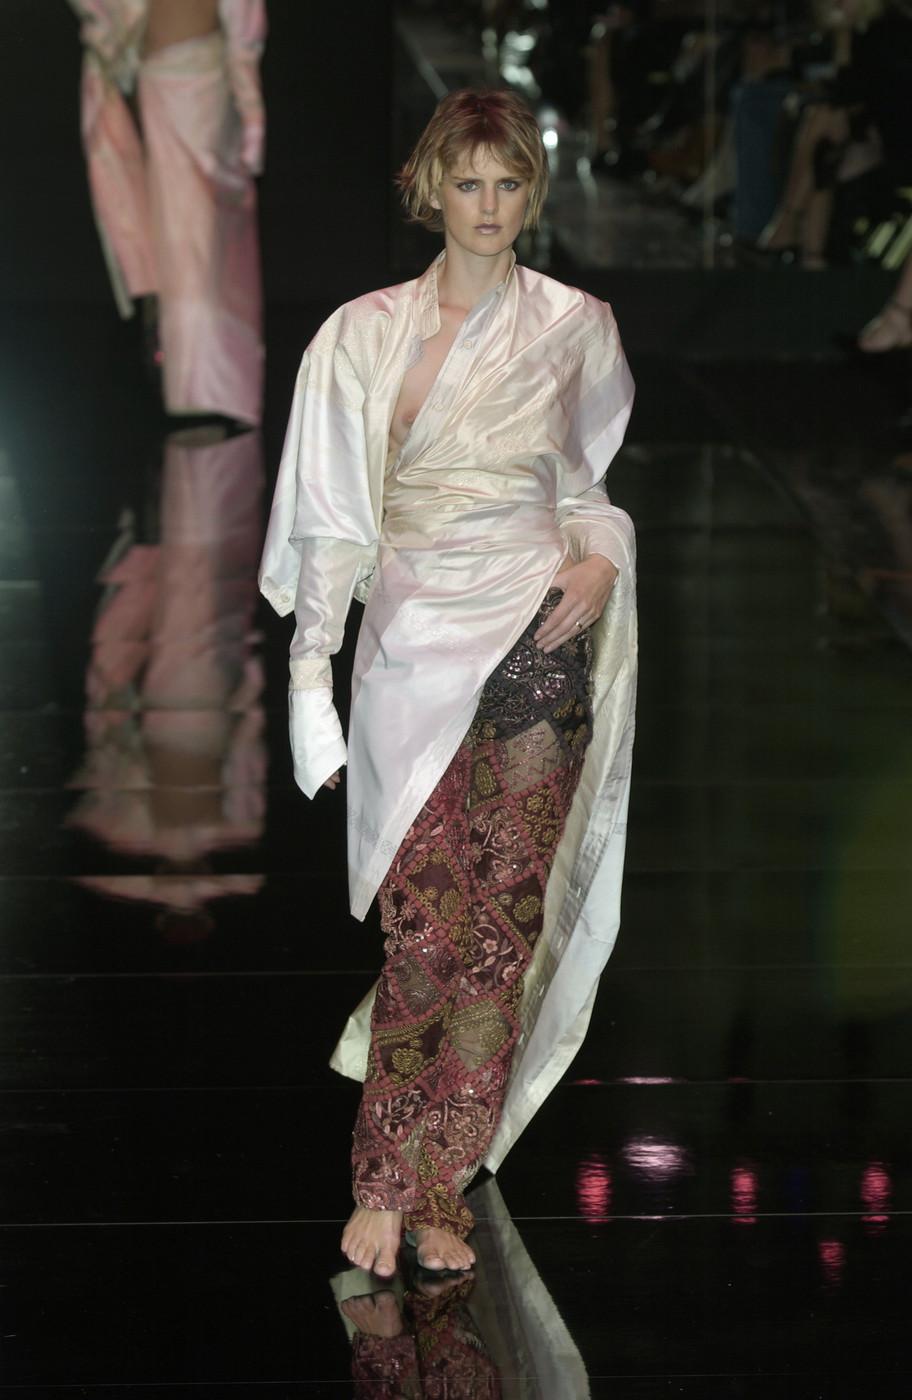 ▪ Gianfranco Ferre raw silk patchwork evening pants 
▪ Elaborate embroidery all-over in metal gold thread and sequins
▪ Straight leg 
▪ Cream silk thread detail outlining each patchwork panel
▪ One of one design; made by hand 
▪ IT 40 - FR 36 - UK